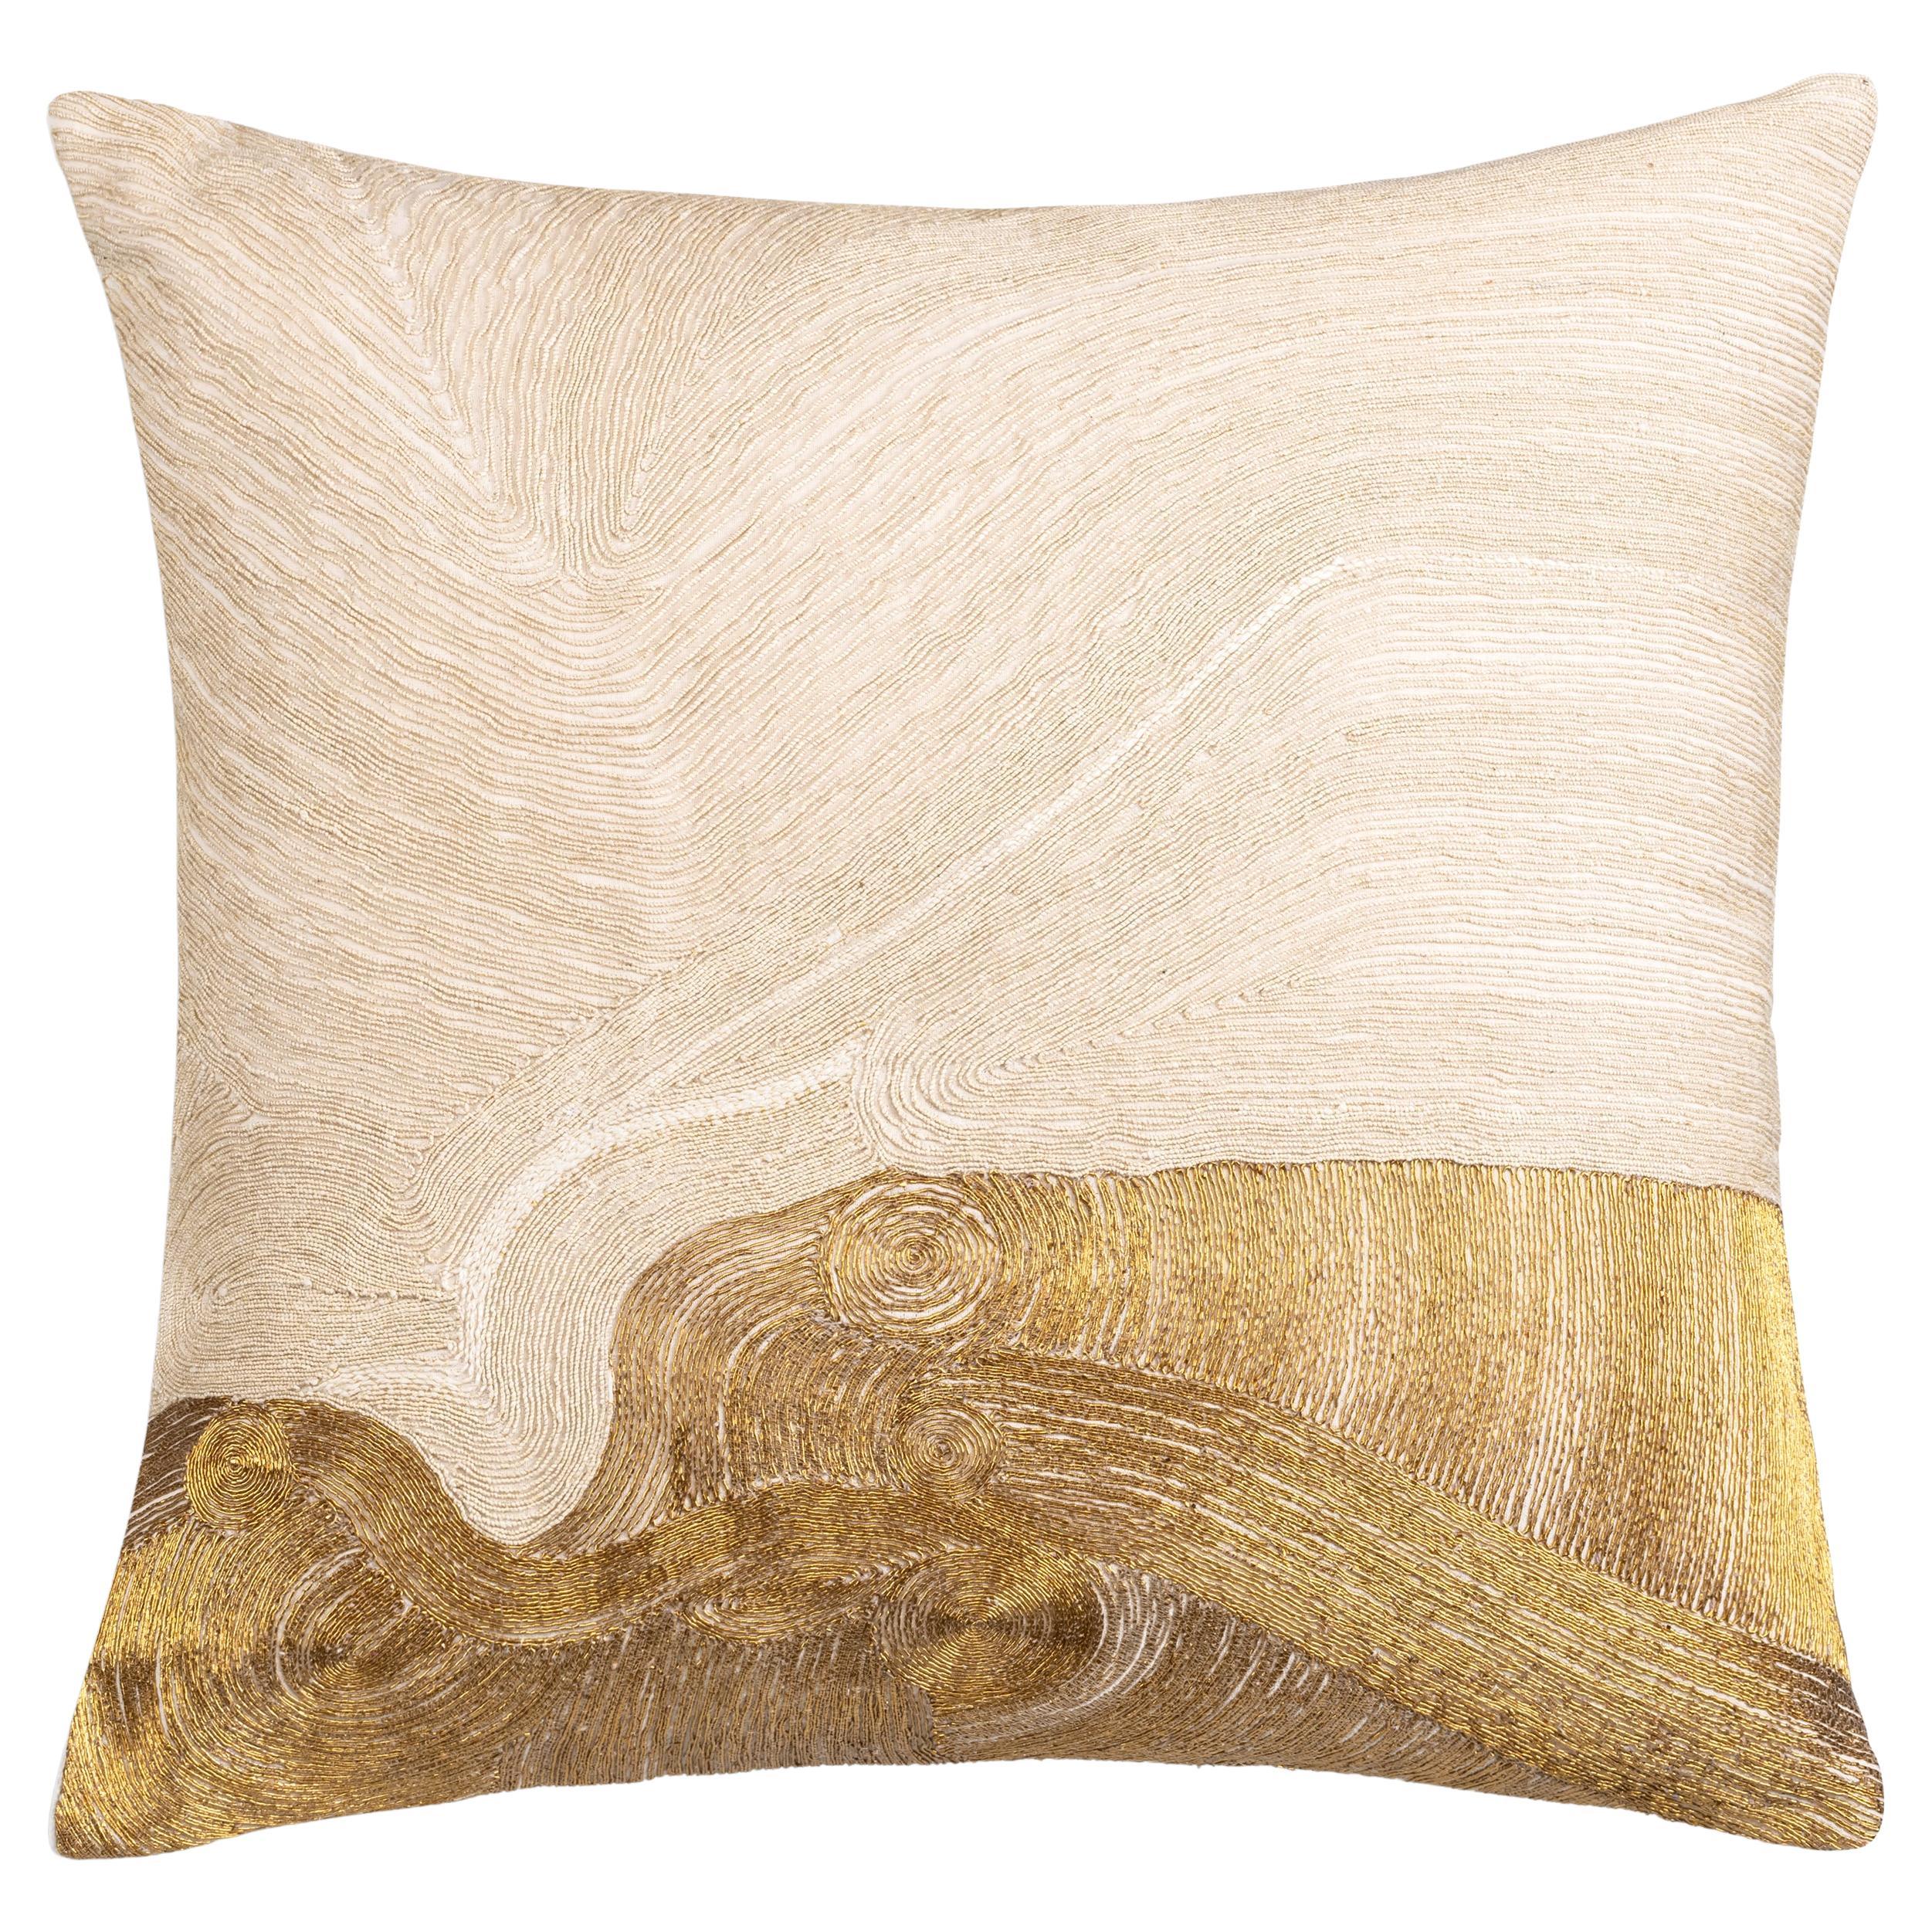 Zer Pillow, Ivory and Gold 